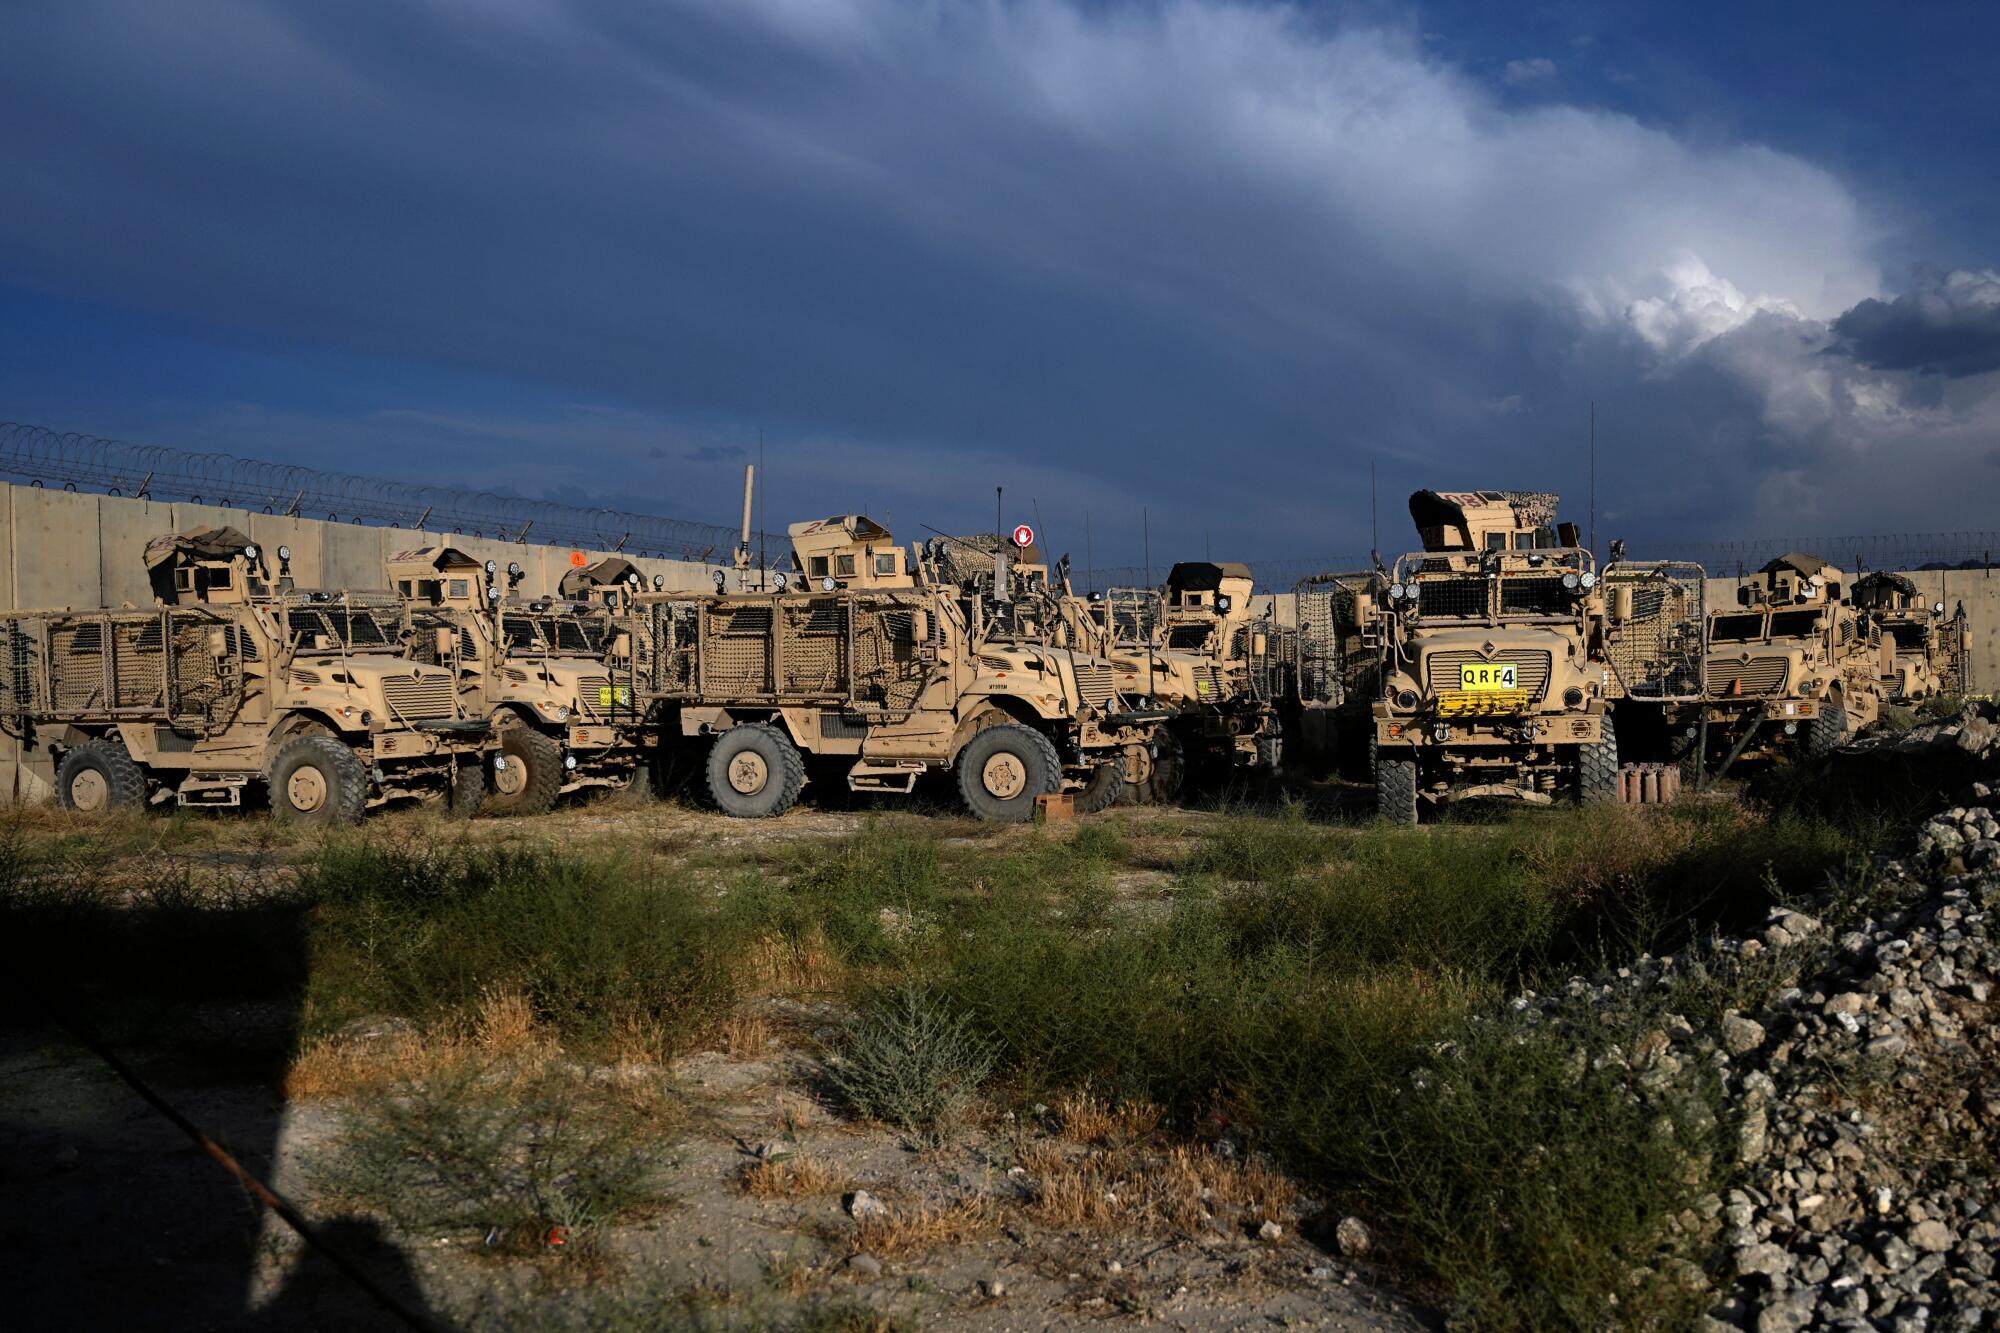 Mine resistant ambush protected vehicles known as MRAPs inside the Bagram base 